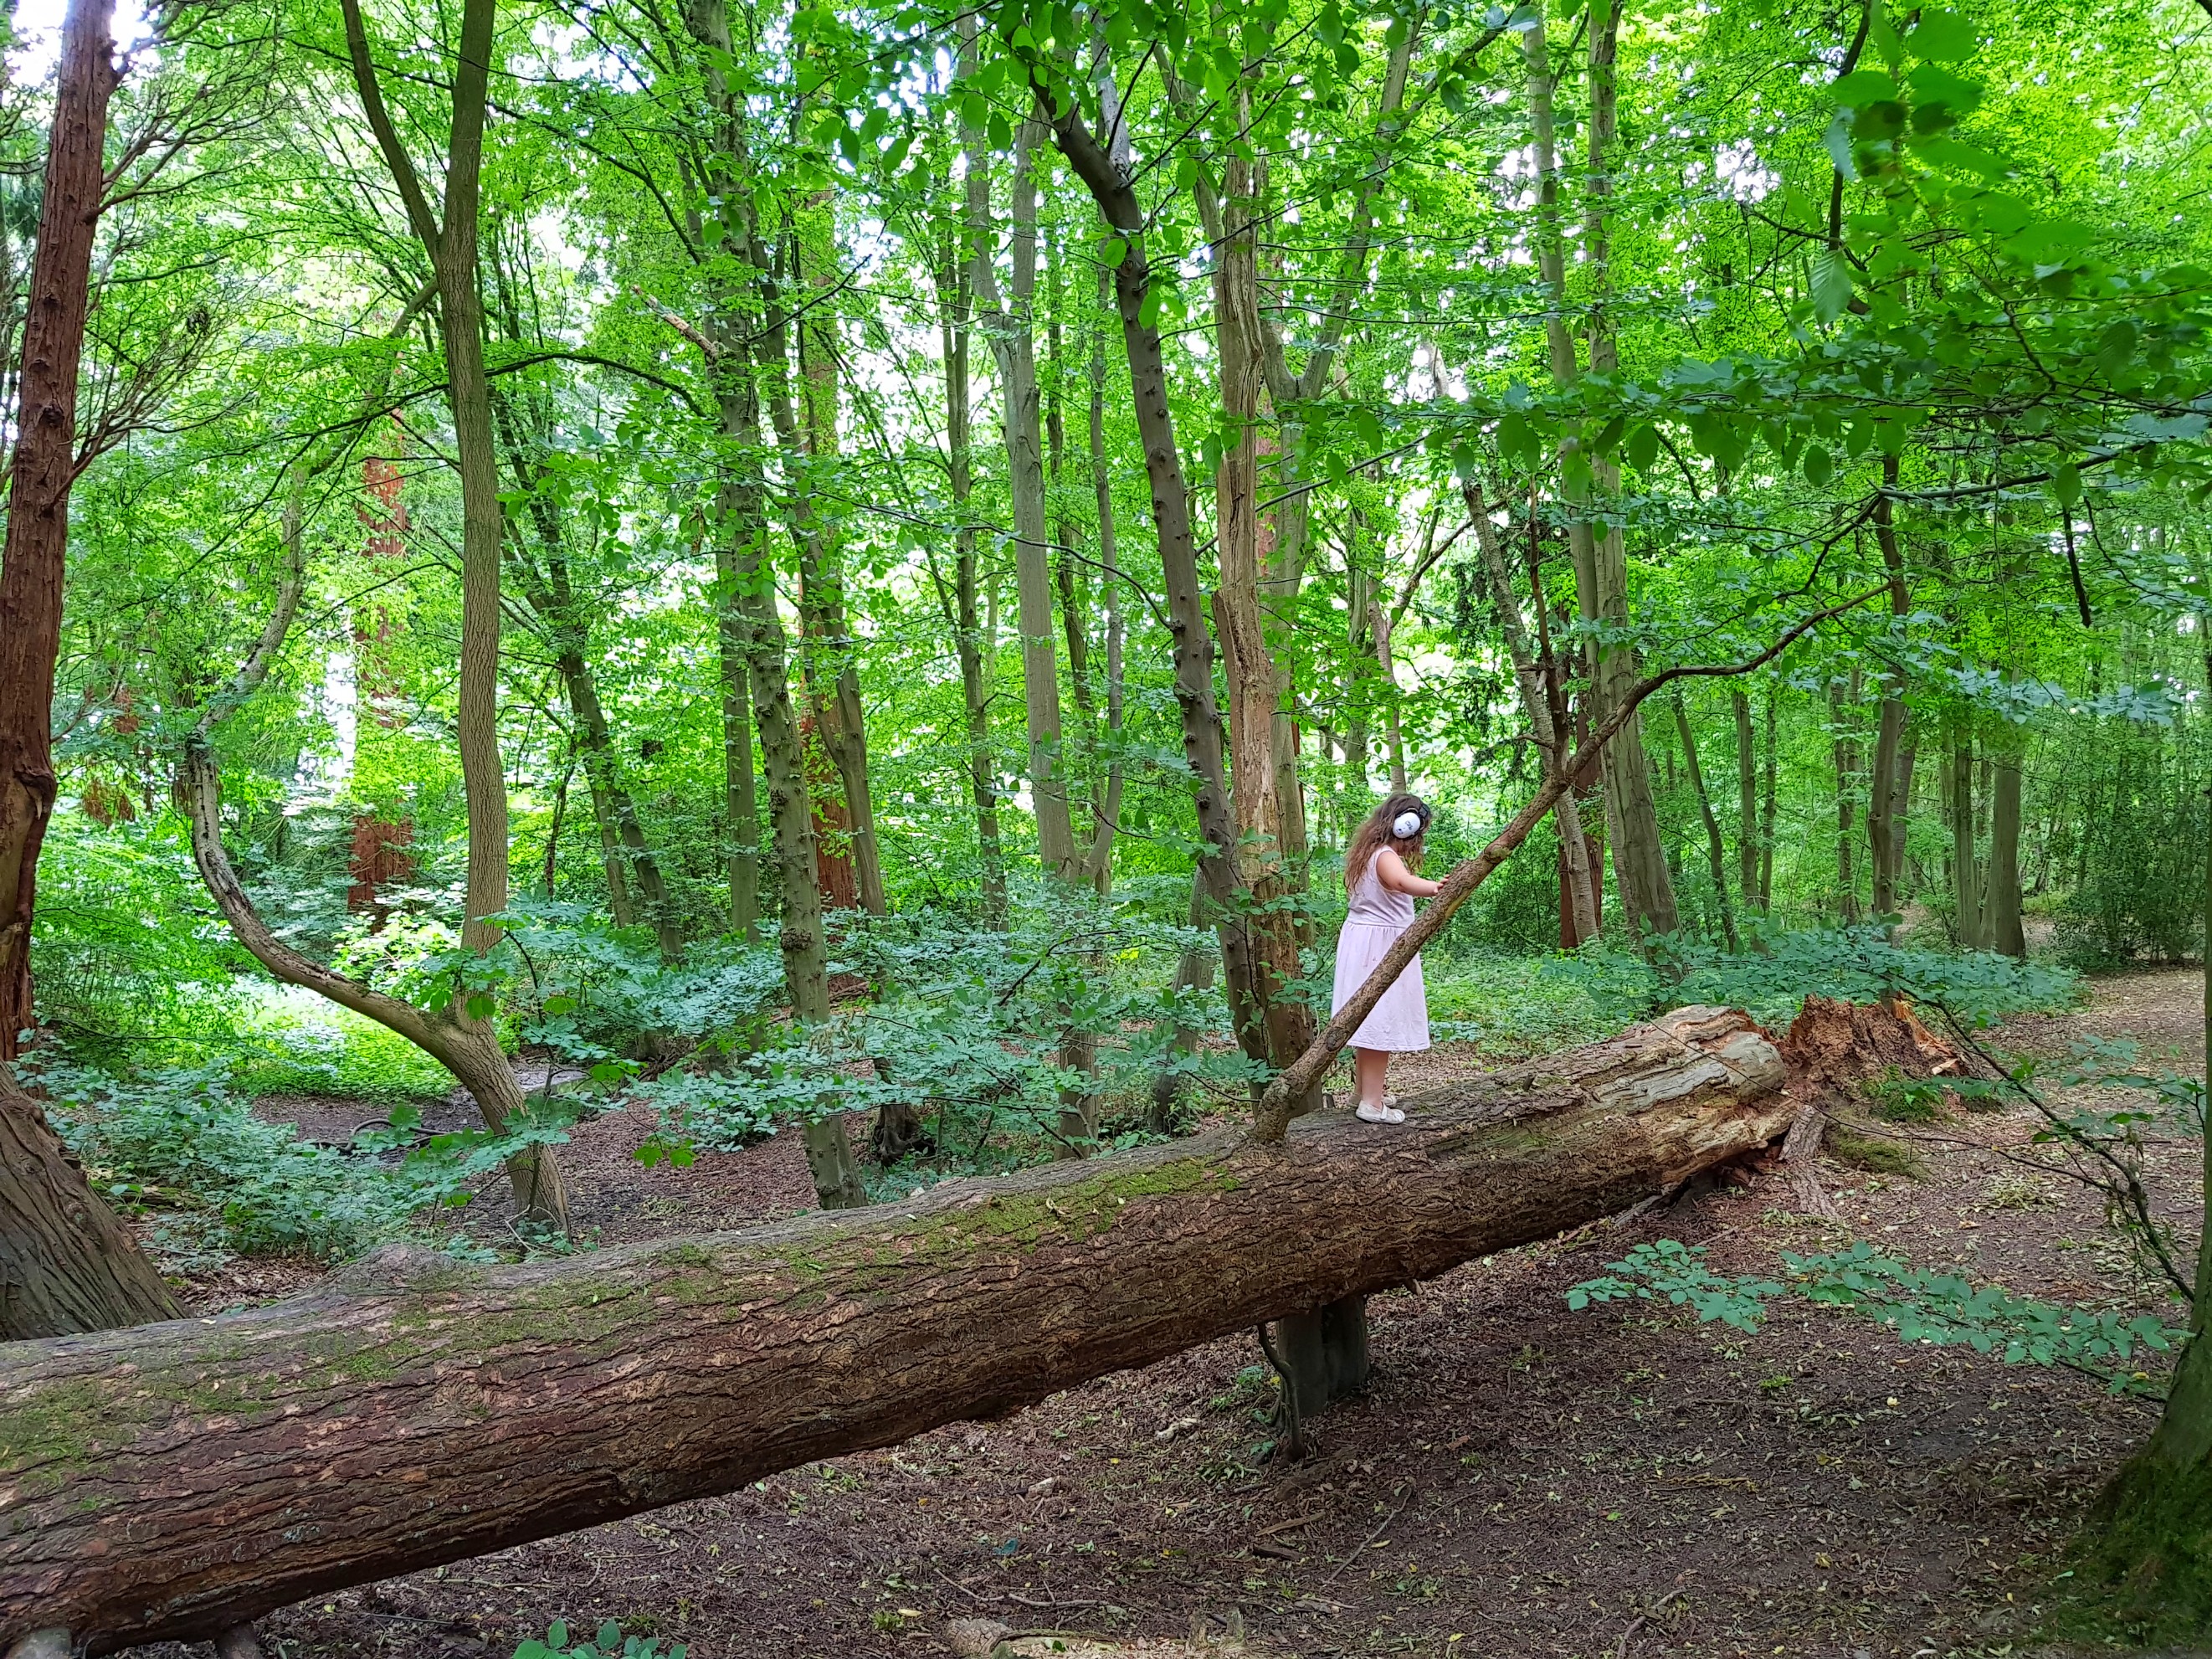 The Wildlife Trust, 30 days wild, #30dayswild, #livinglifewild, nature reserve, nature, wildlife, natural environment, woodland, outdoors, get outside, childhood unplugged, visit Herts, places to visit, Gobions Wood, Hertfordshire, things to do, family fun, explore outdoors, Living Life Our Way